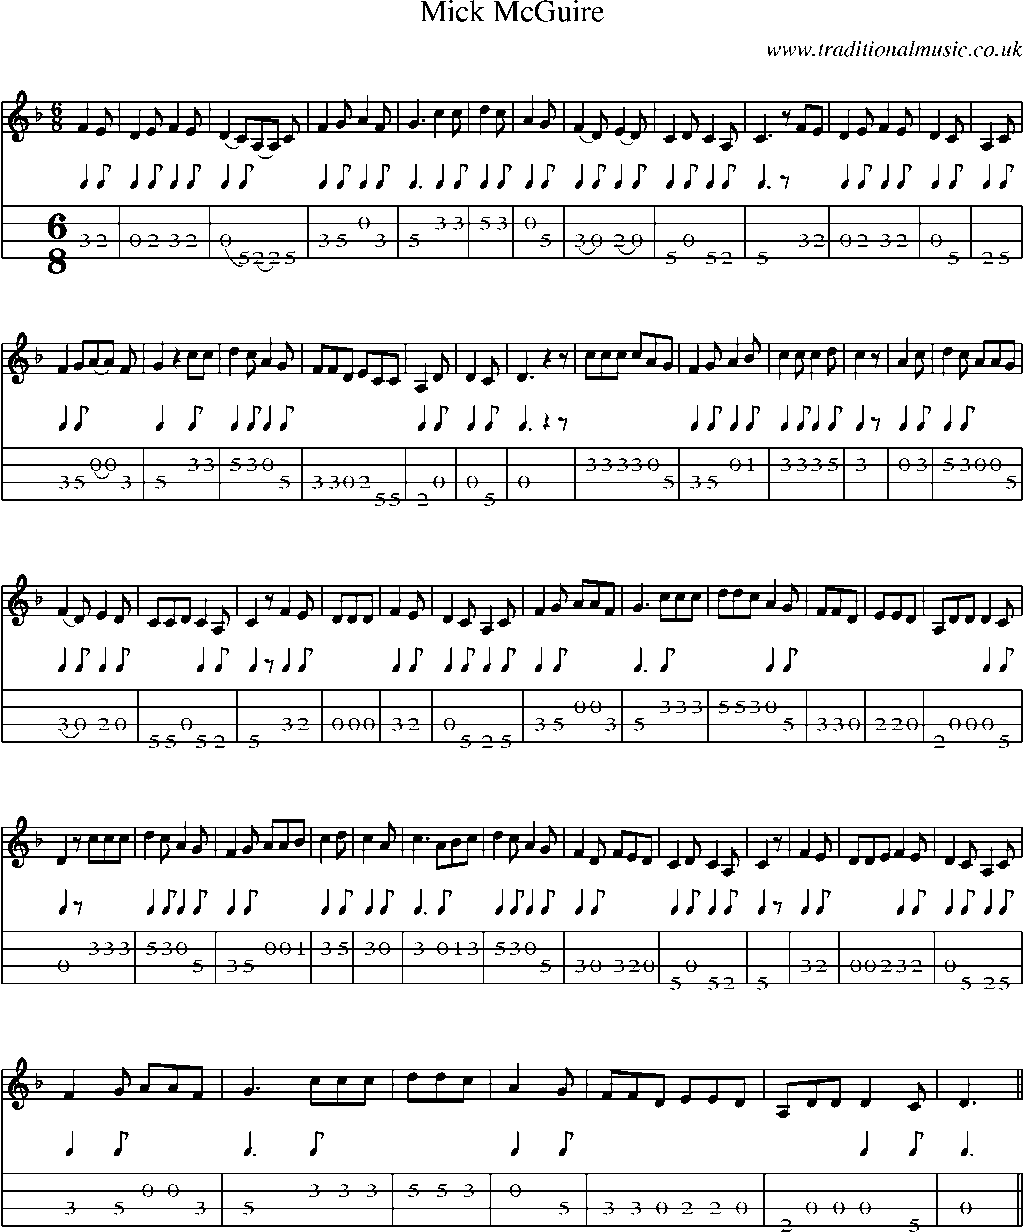 Mandolin Tab and Sheet Music for Mick Mcguire